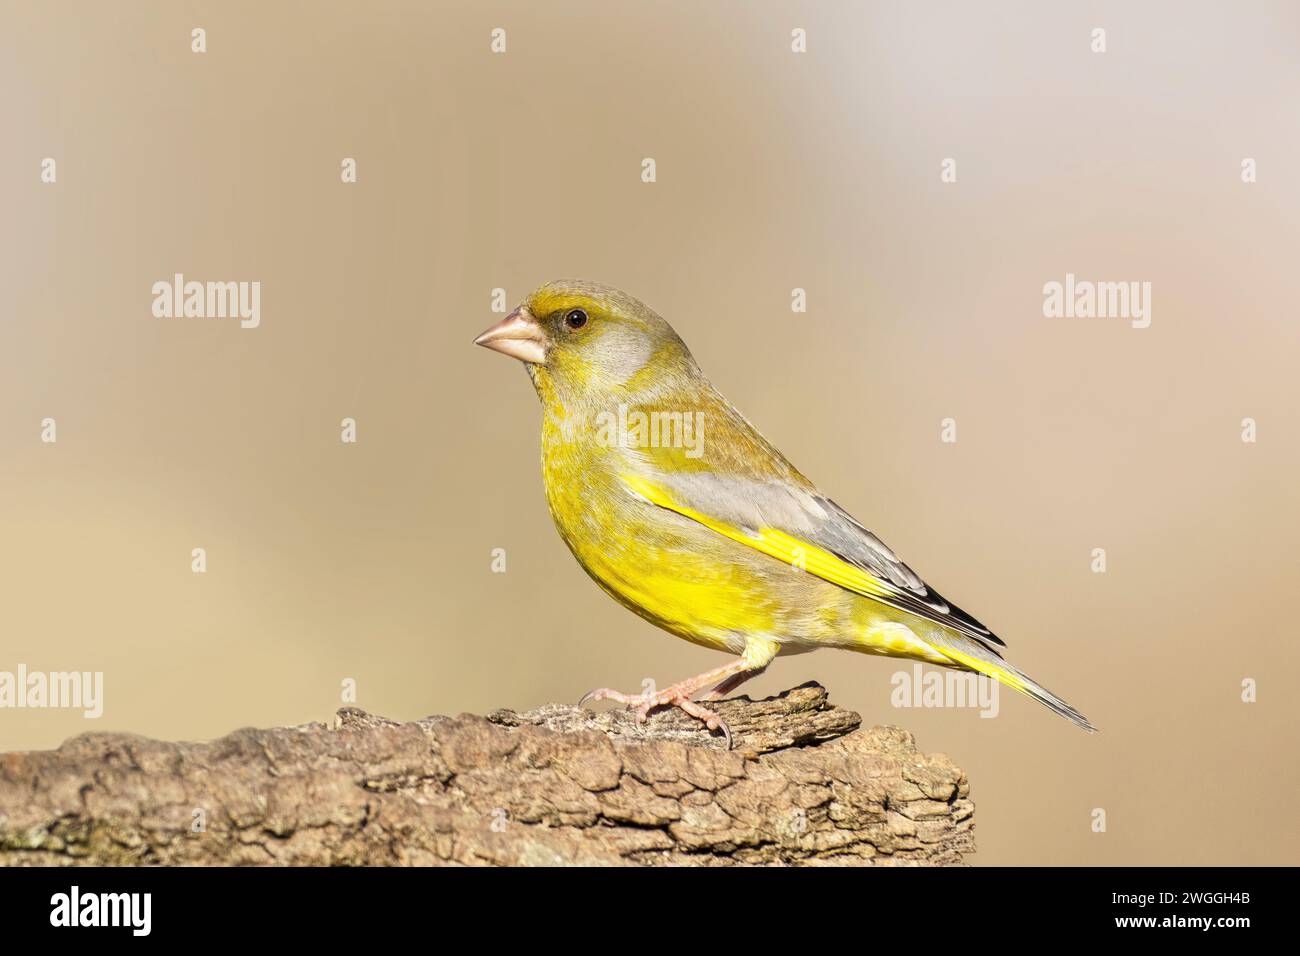 Greenfinch, Carduelis Chloris, resting on a branch Stock Photo